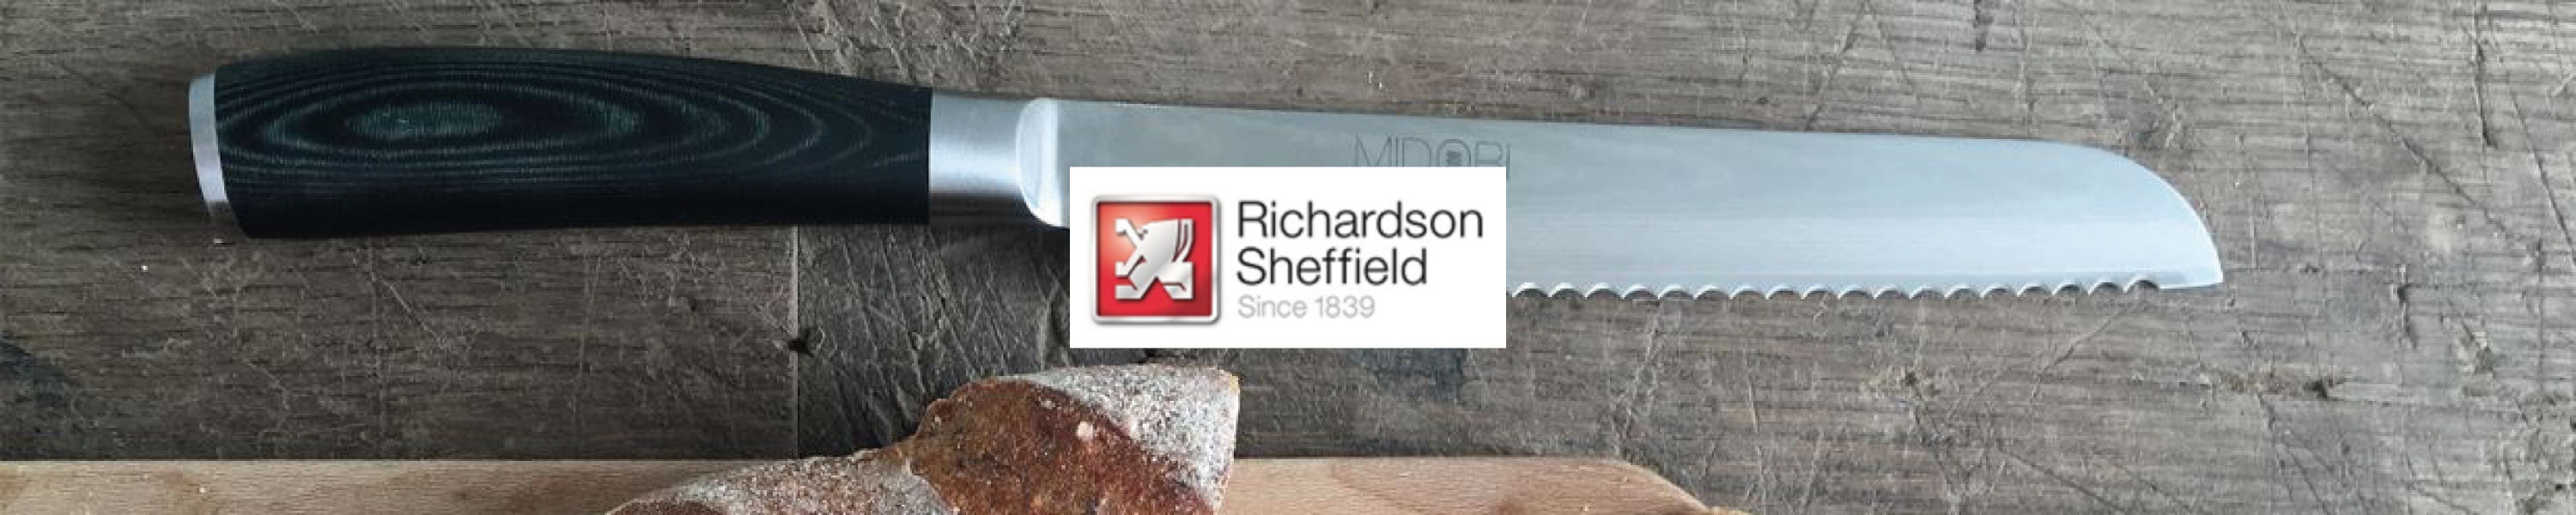 Richardson Sheffield Knife Set for sale online with Kings and Queens